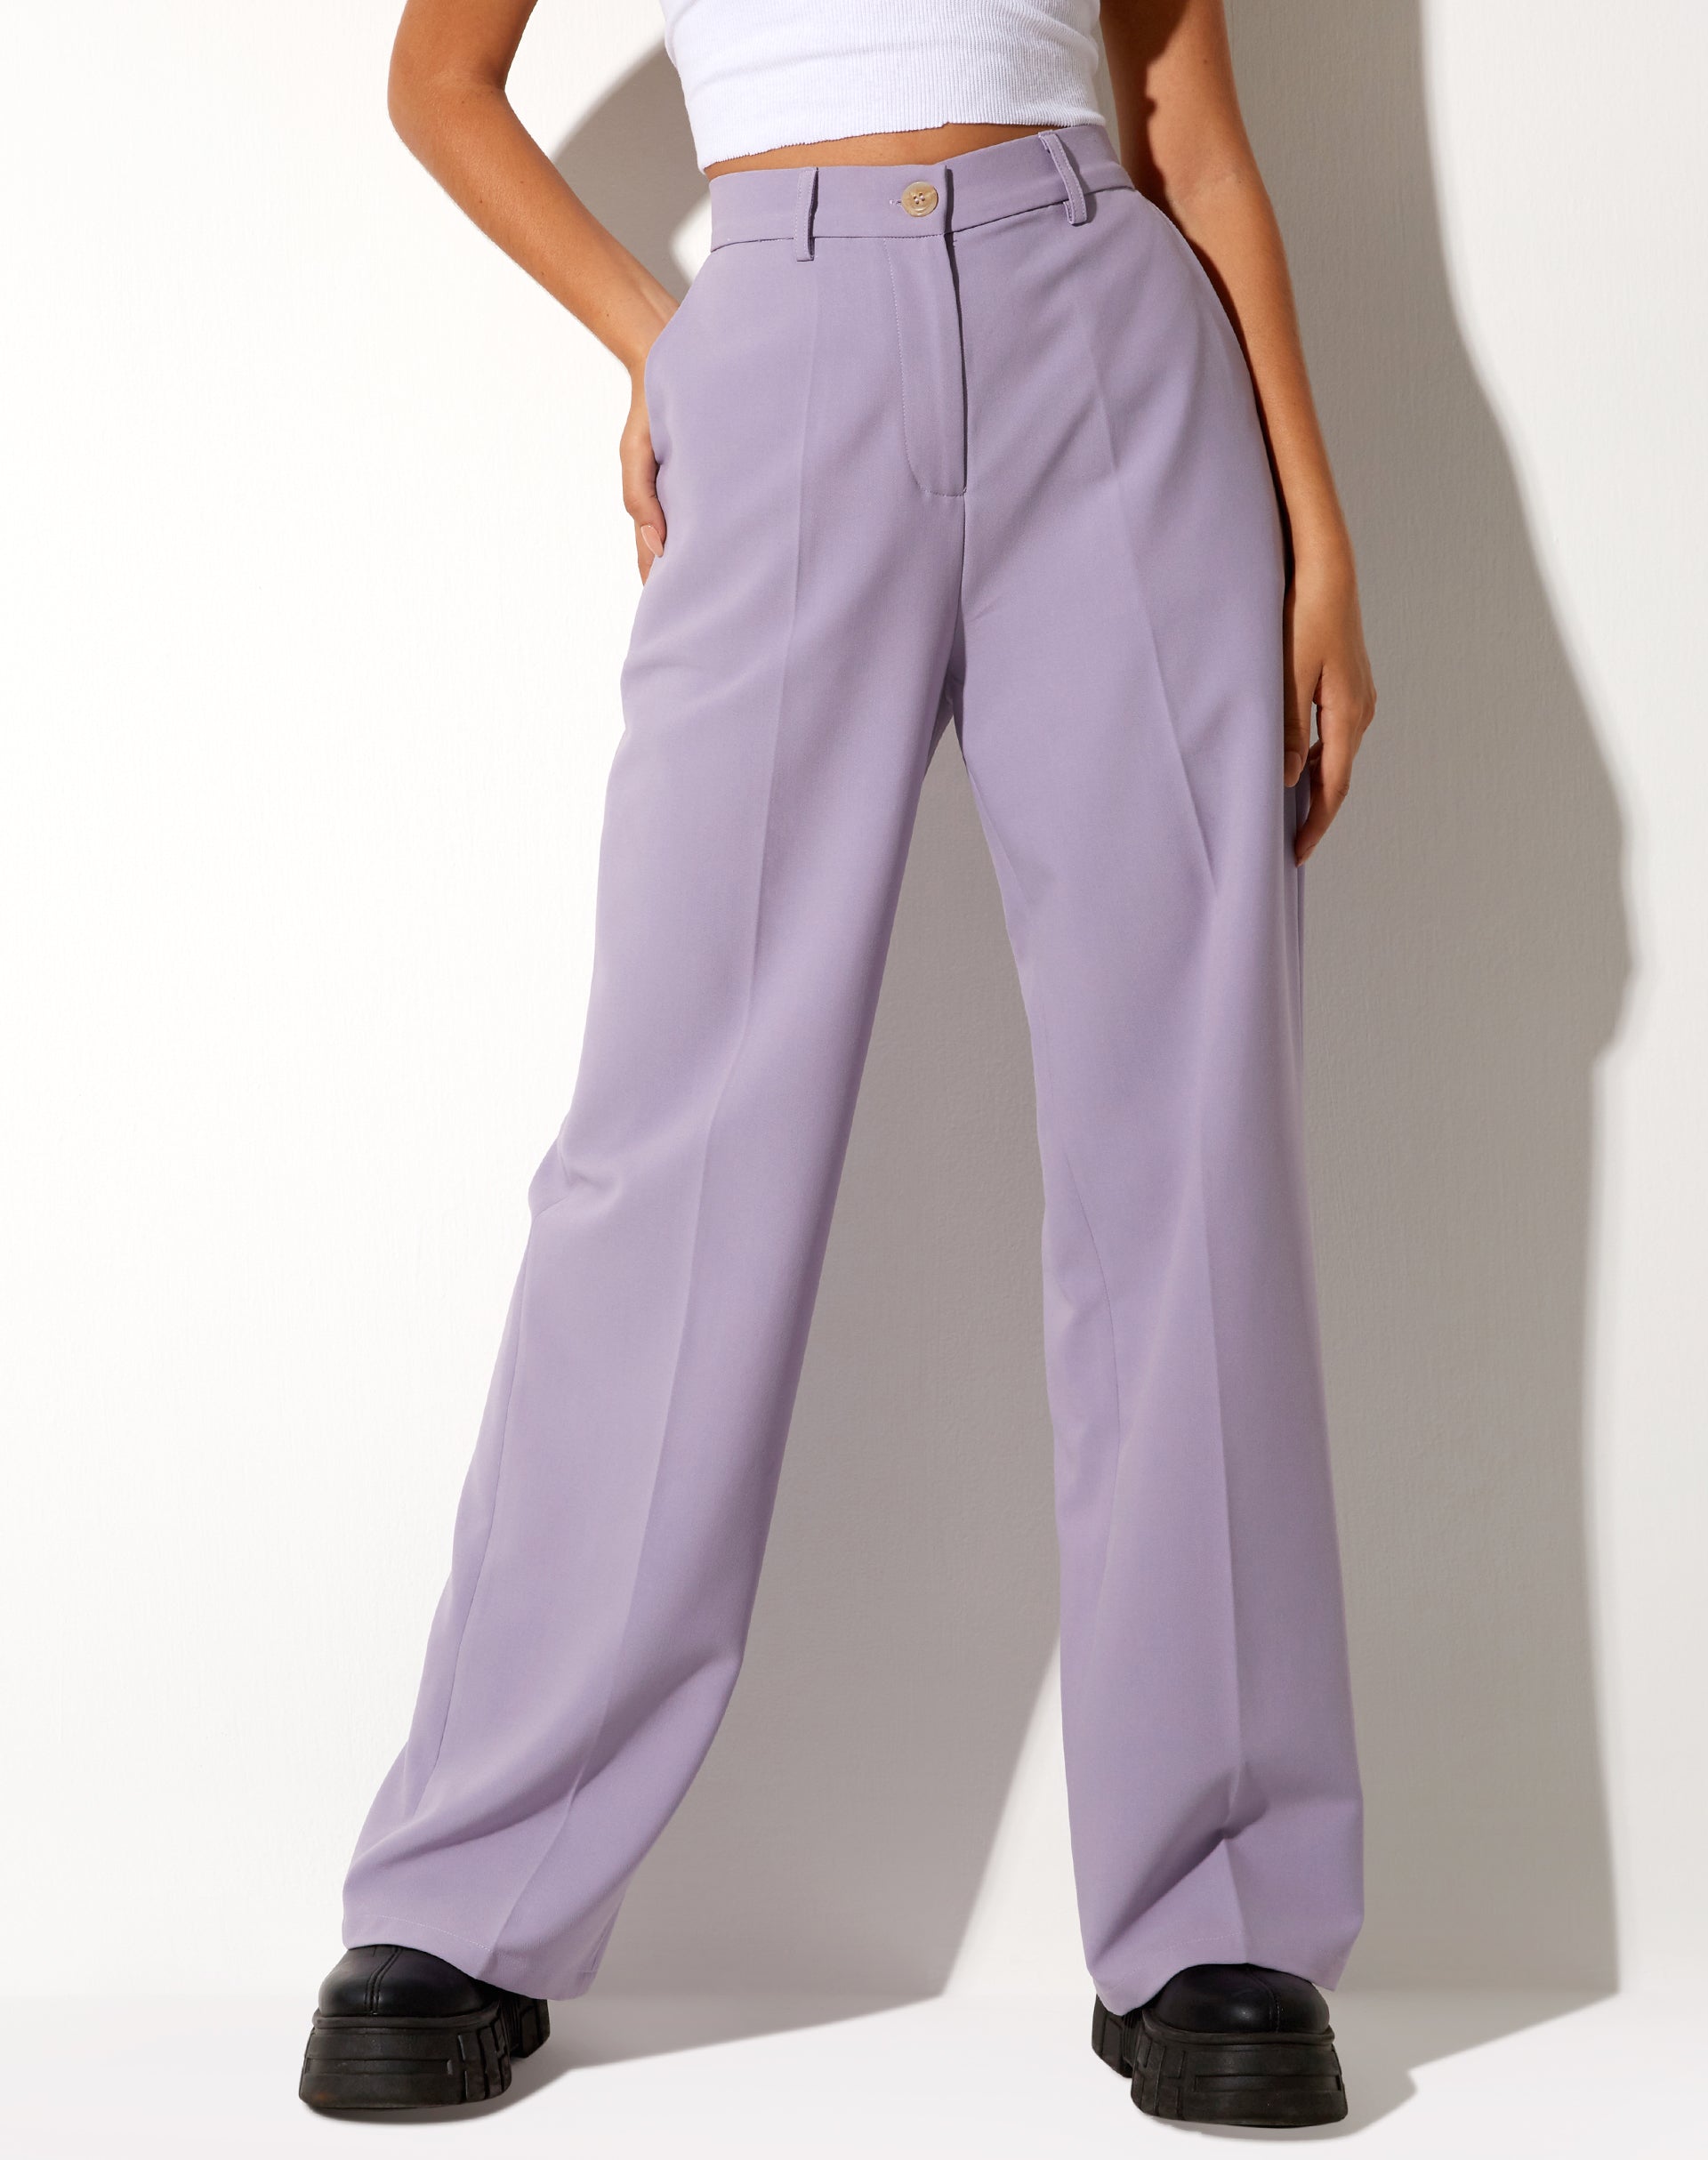 Image of Abba Straight Leg Trouser in Tailoring Purple